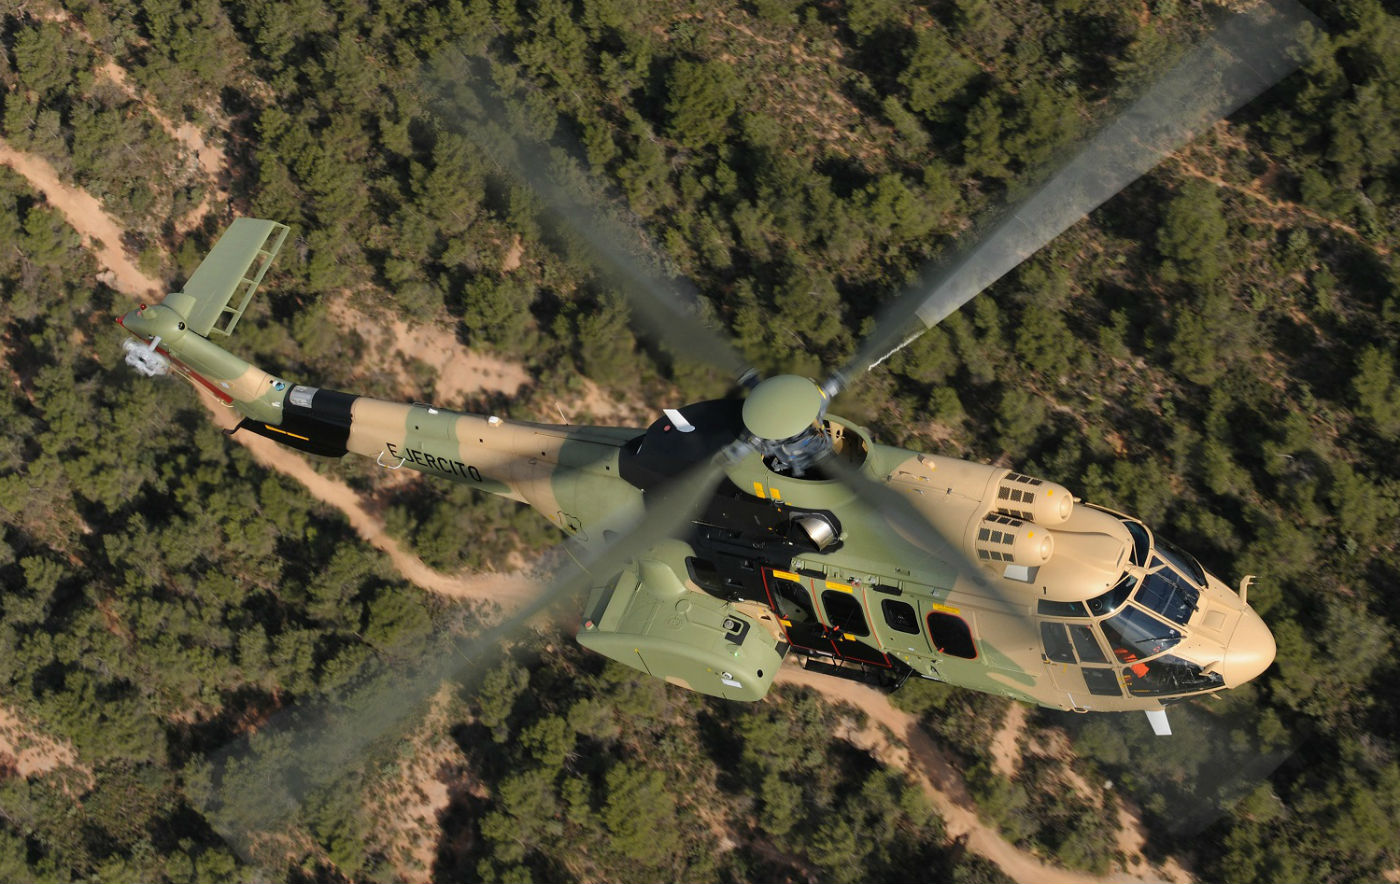 Initially signed for five years, the agreement has been extended to 15 years, further underlining the commitment of Airbus Helicopters and IAR to jointly contribute to the modernization of the Romanian Armed Forces’ fleet of multirole helicopters in the long term. Airbus Photo